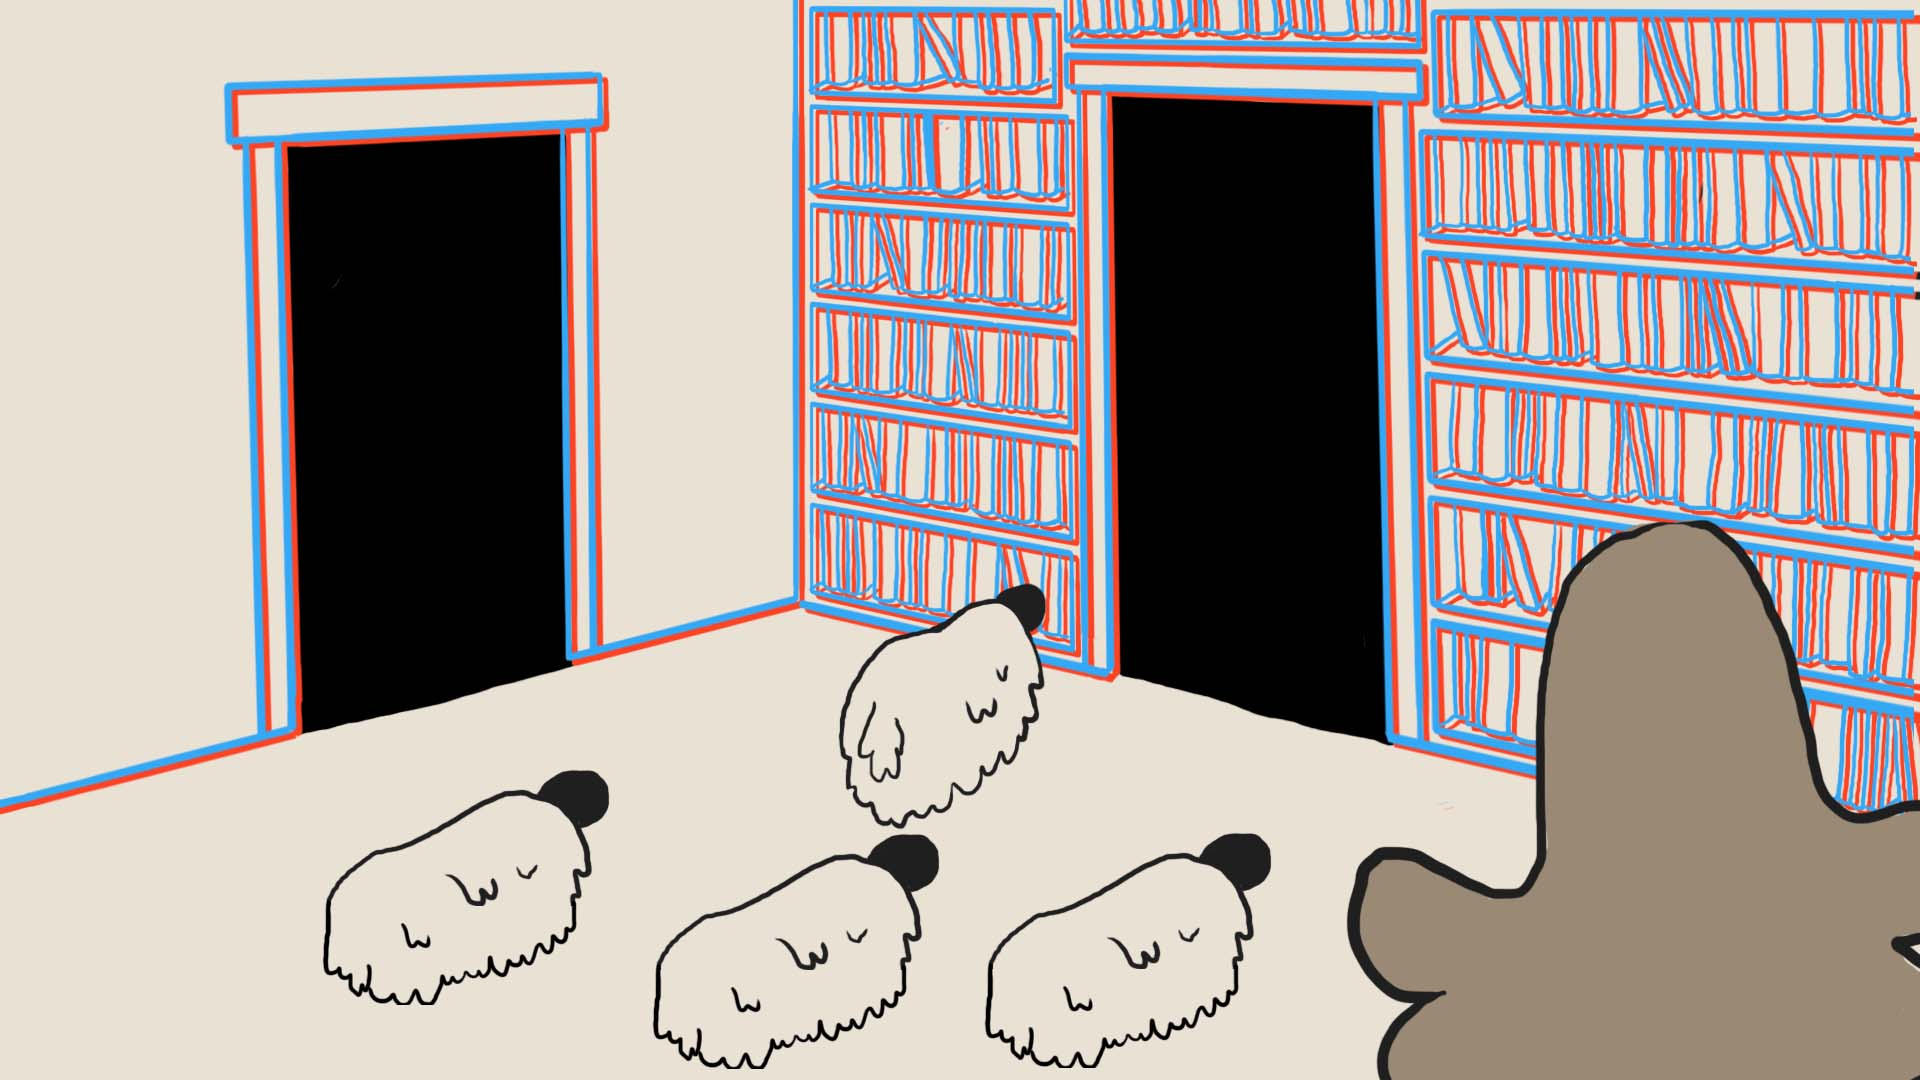 Sheep inside the library